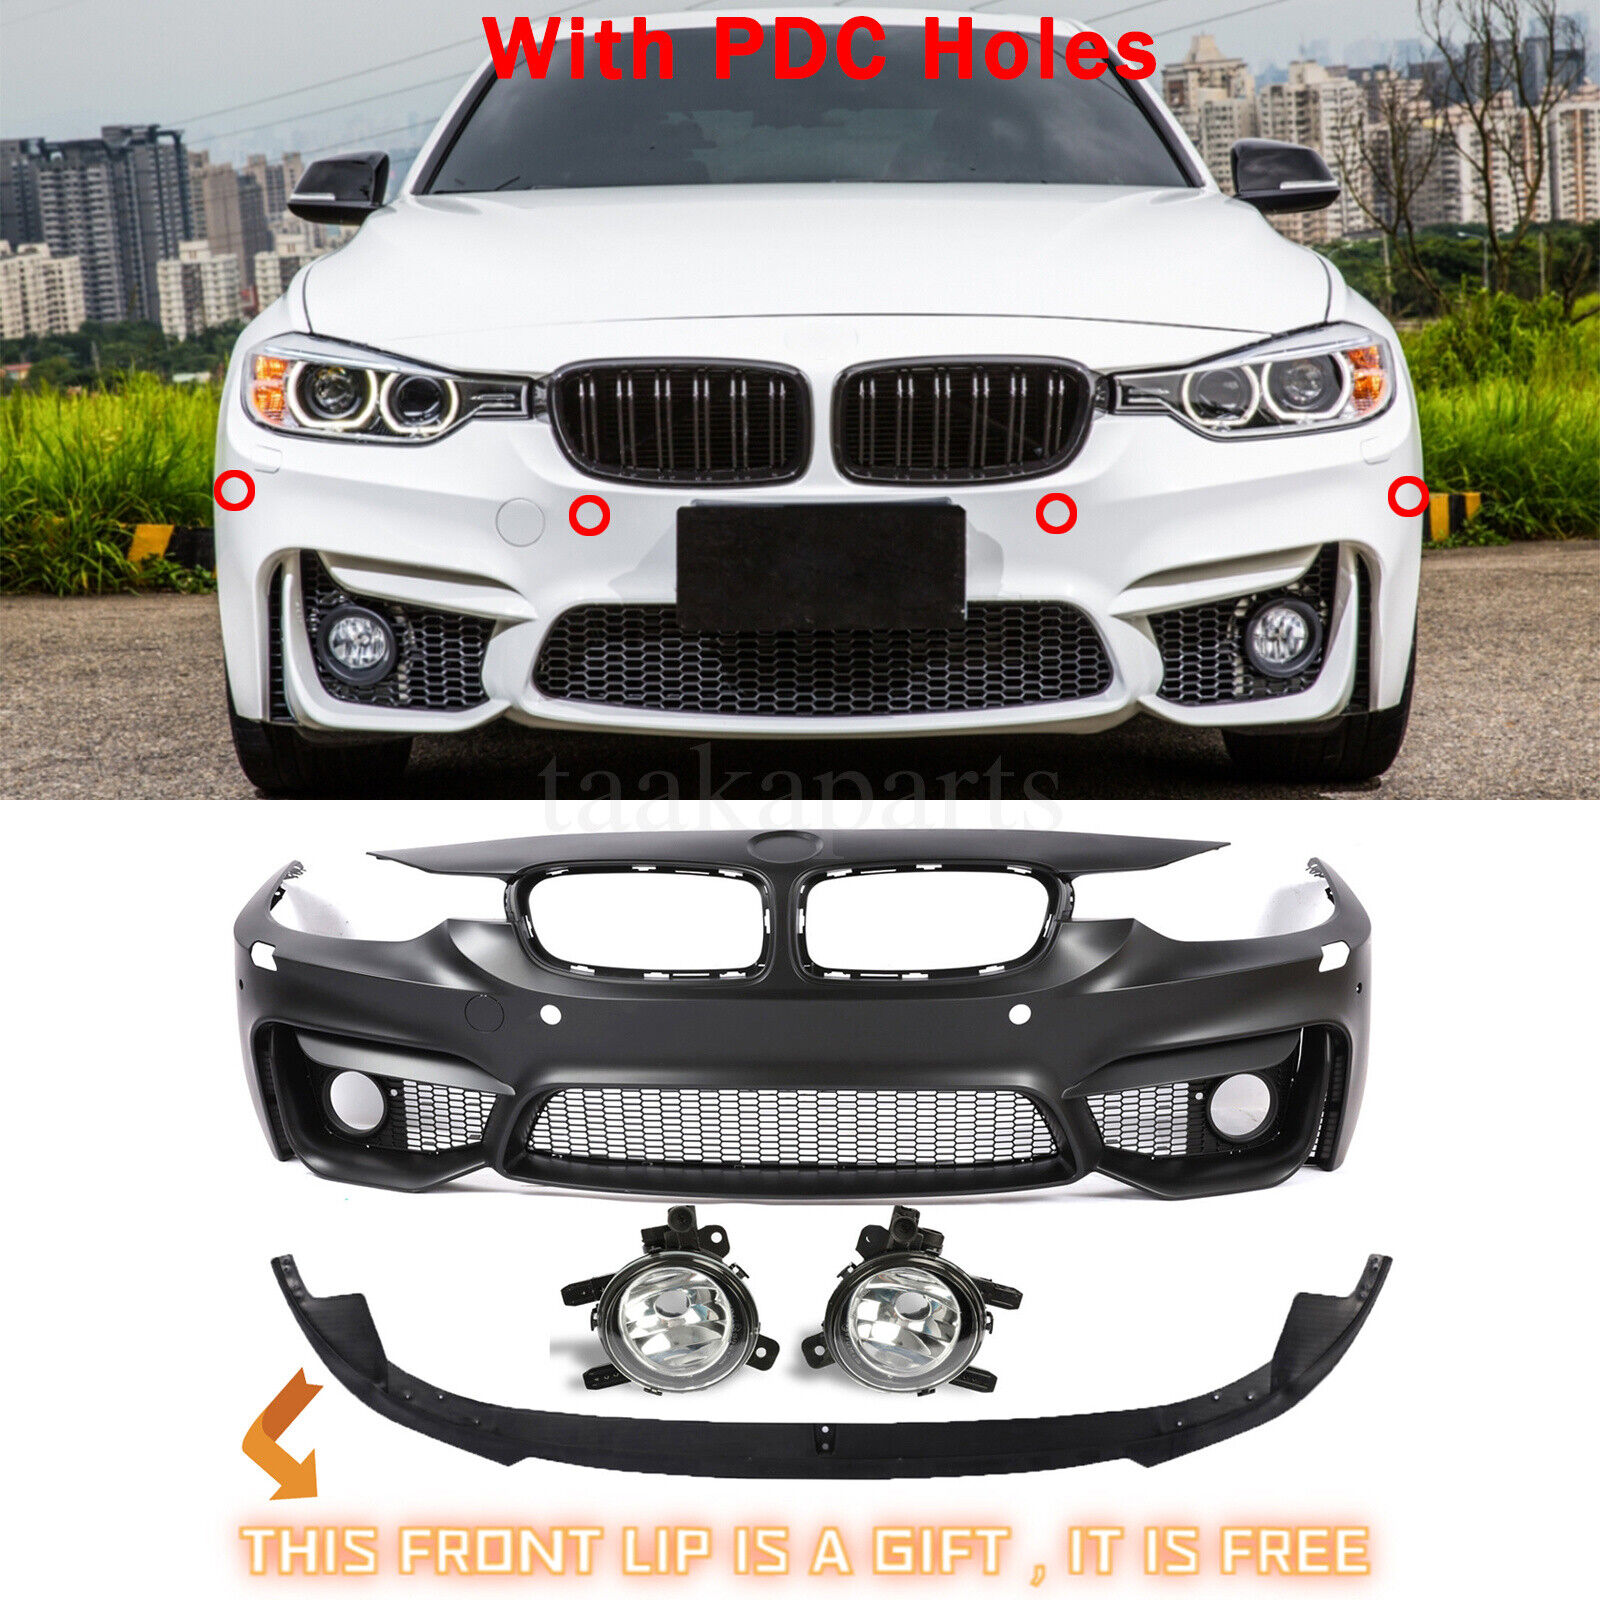 Unpainted F30 M3 Style Front Bumper Cover Kit For BMW F30 F31 3 Series 2012-2019